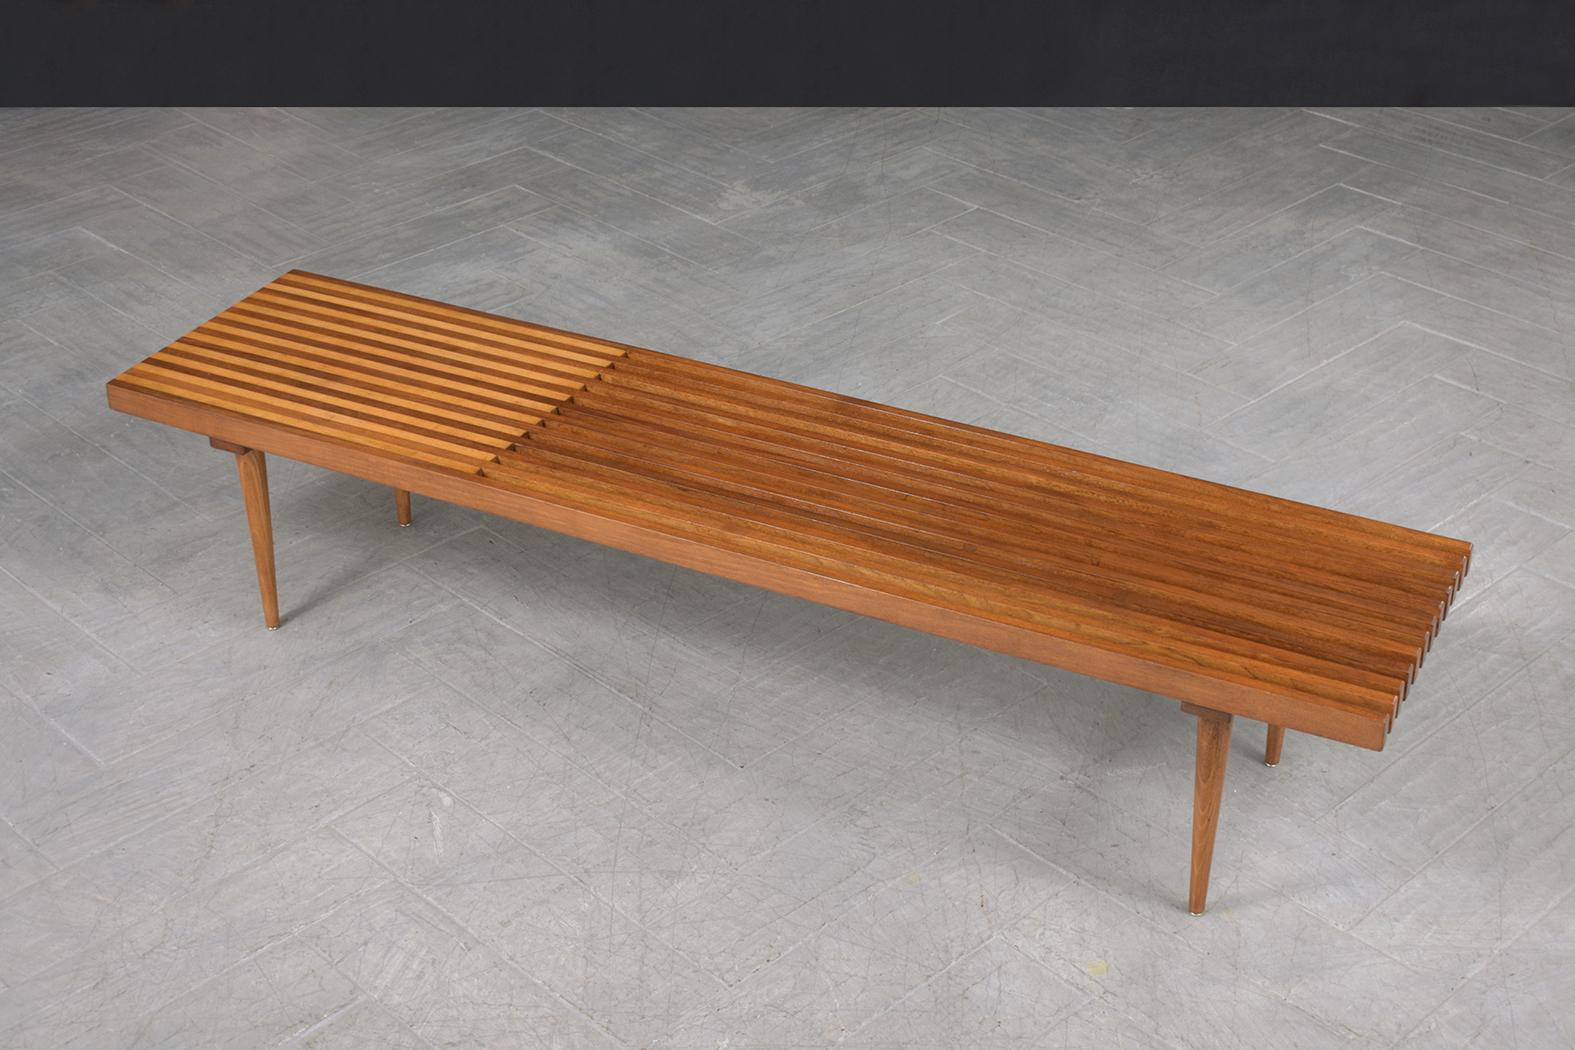 Hand-Crafted Restored Mid-Century Modern Slatted Bench